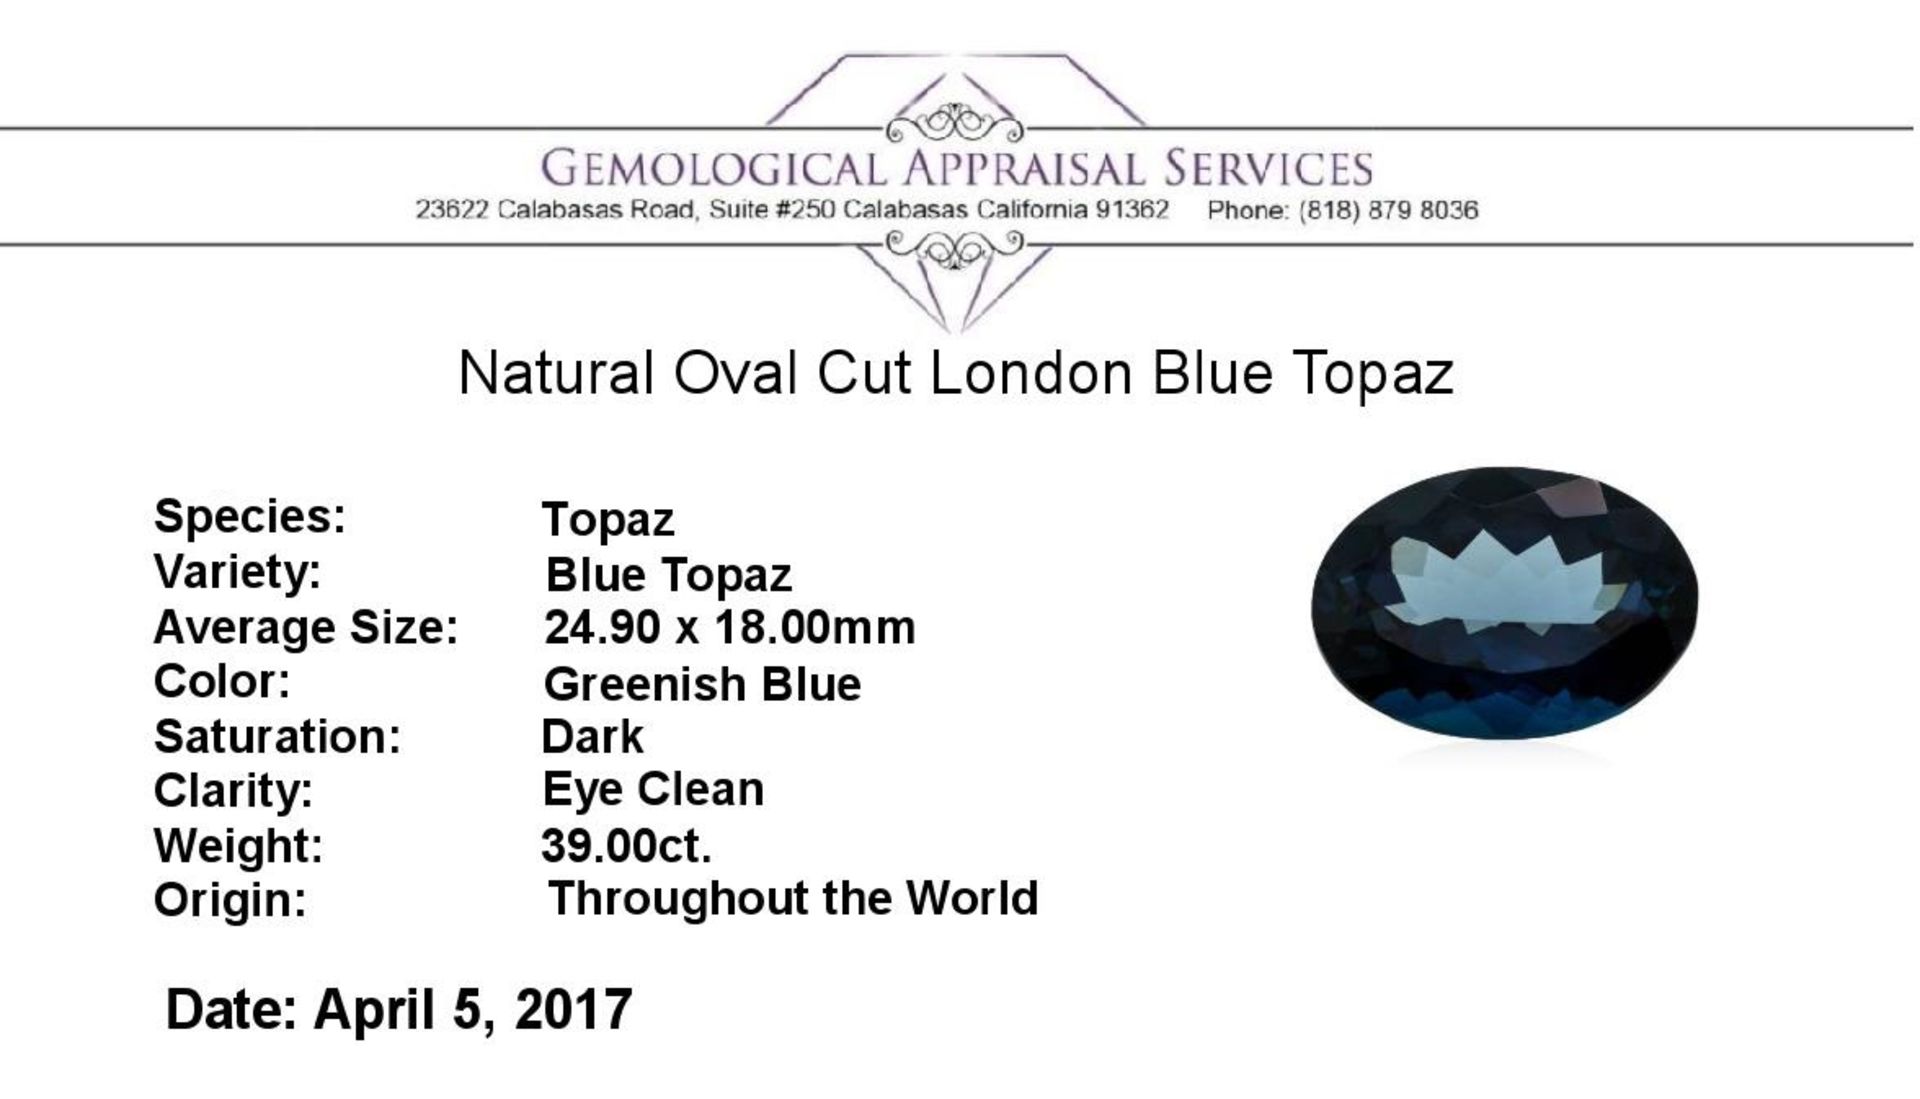 39.00 ct. Natural Oval Cut London Blue Topaz - Image 3 of 3